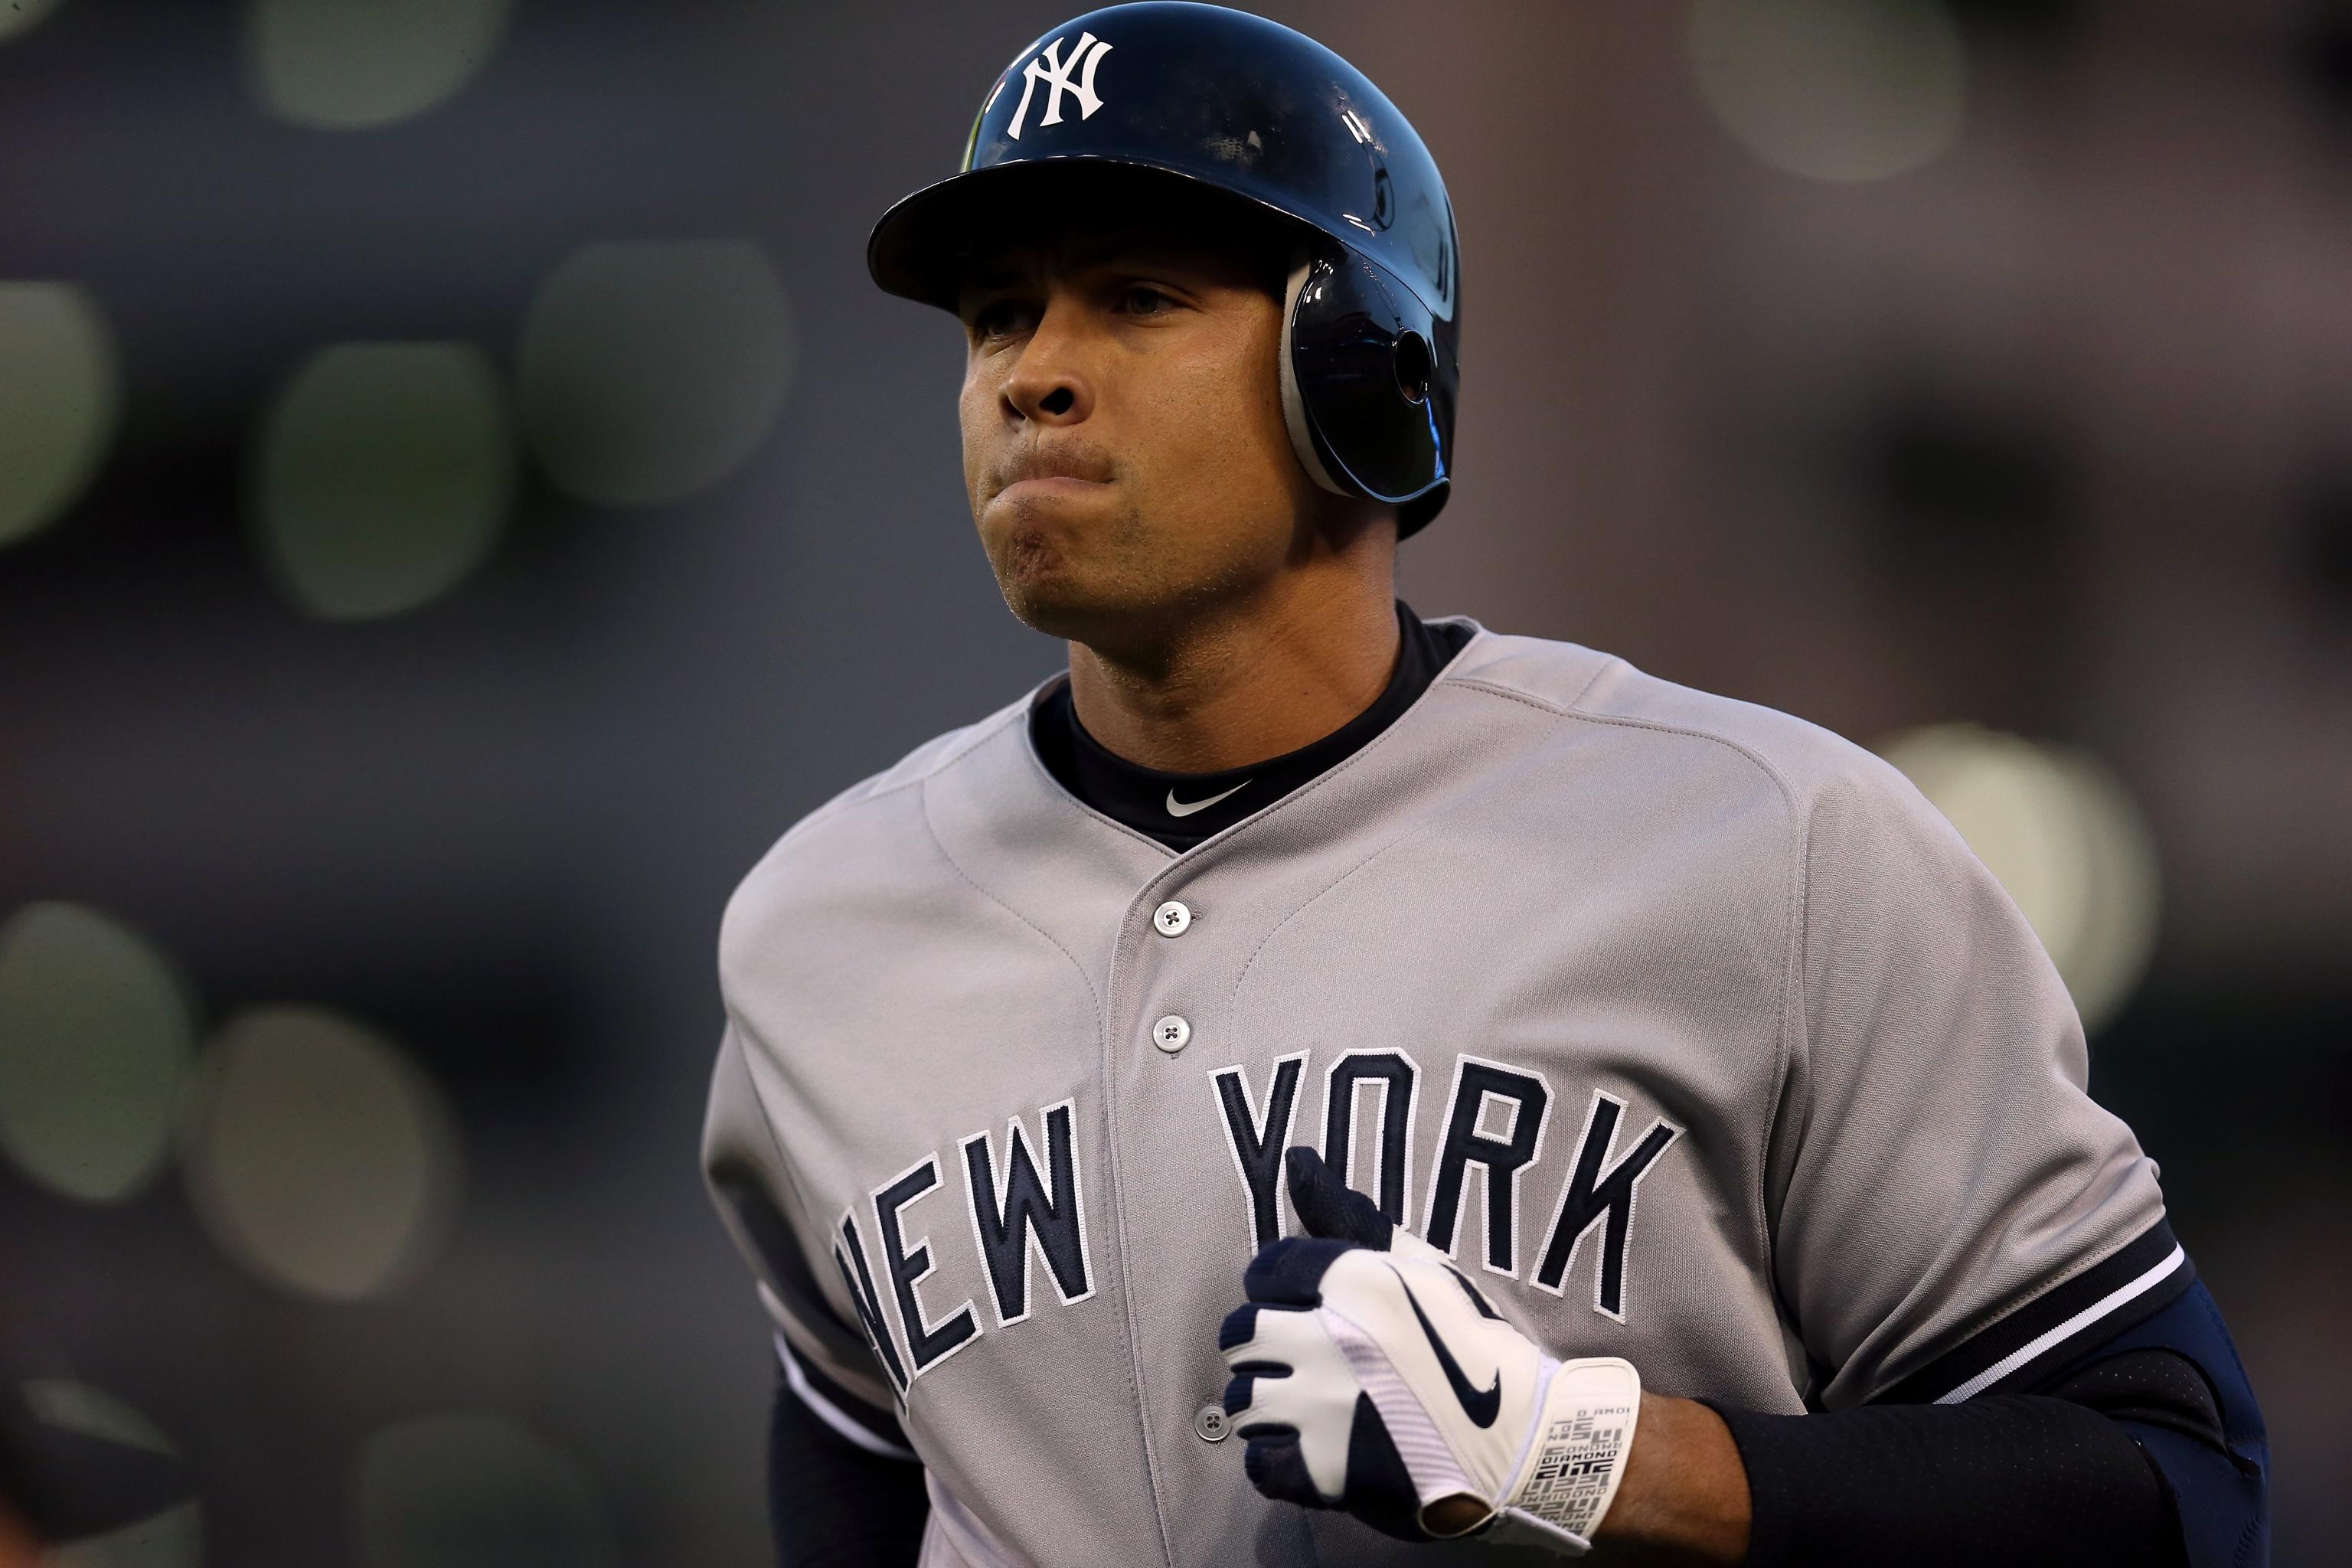 MLB News: Did Arod want to return to MLB but didn't because of